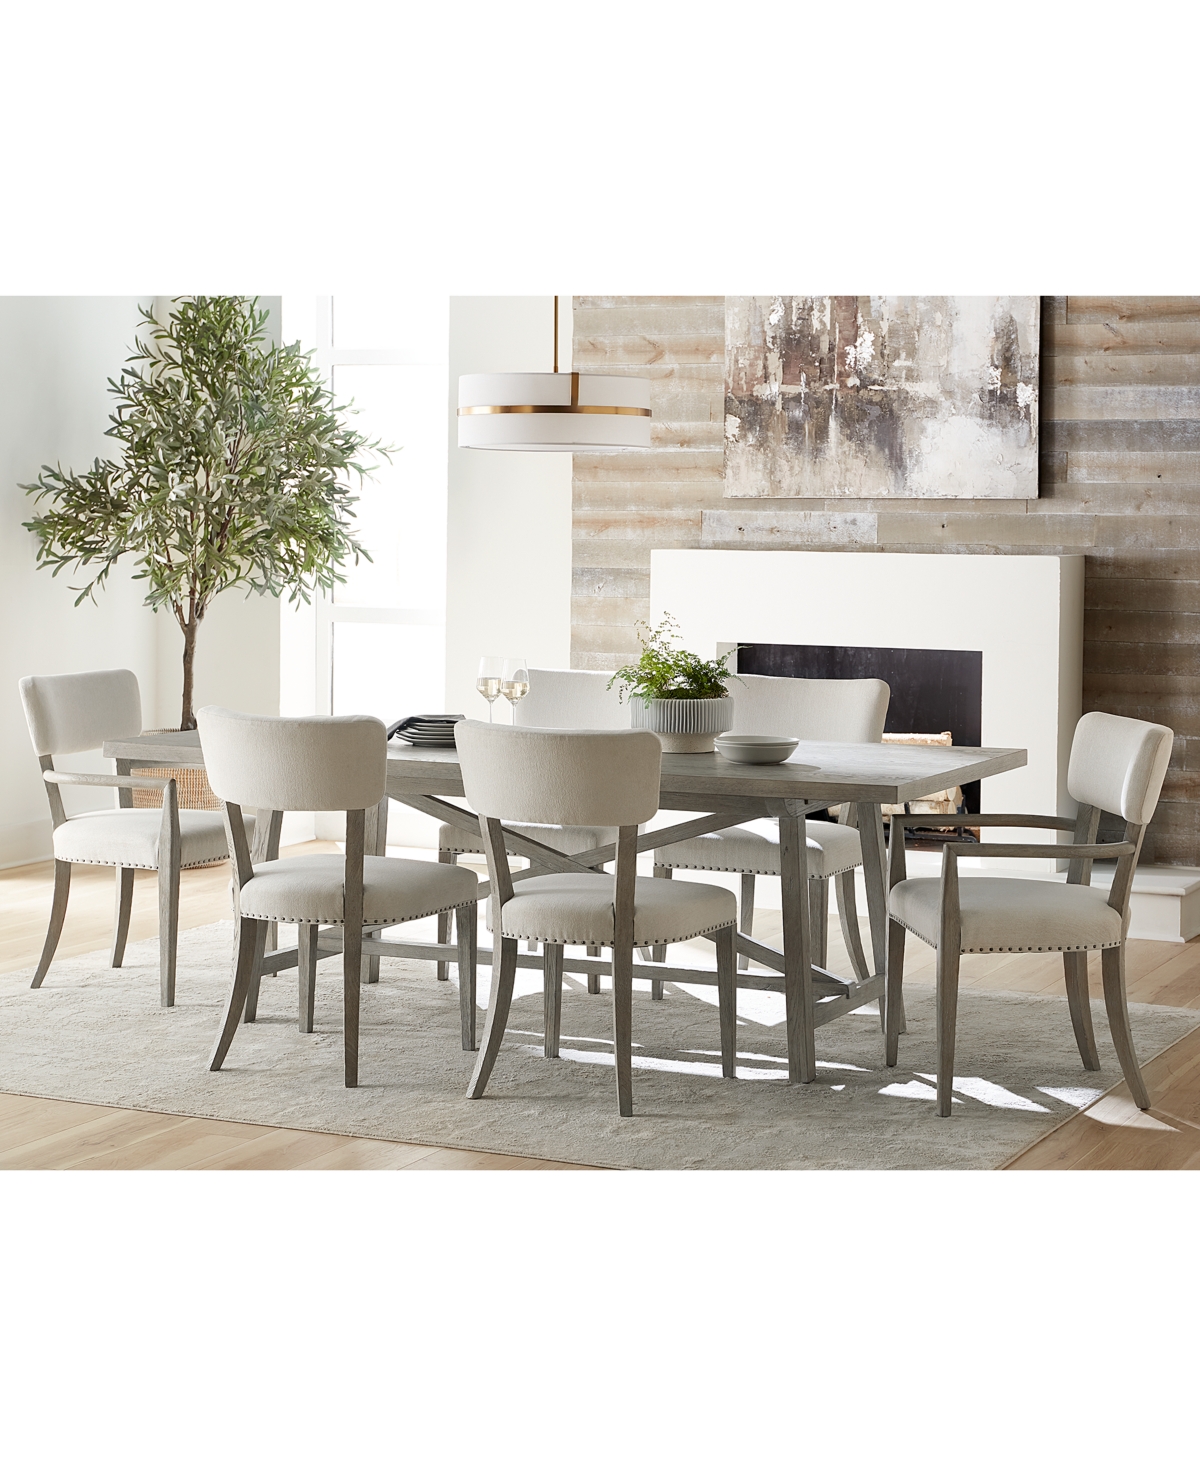 Albion 7-pc. Dining Set (Table, 4 Side Chairs, and 2 Arm Chairs)